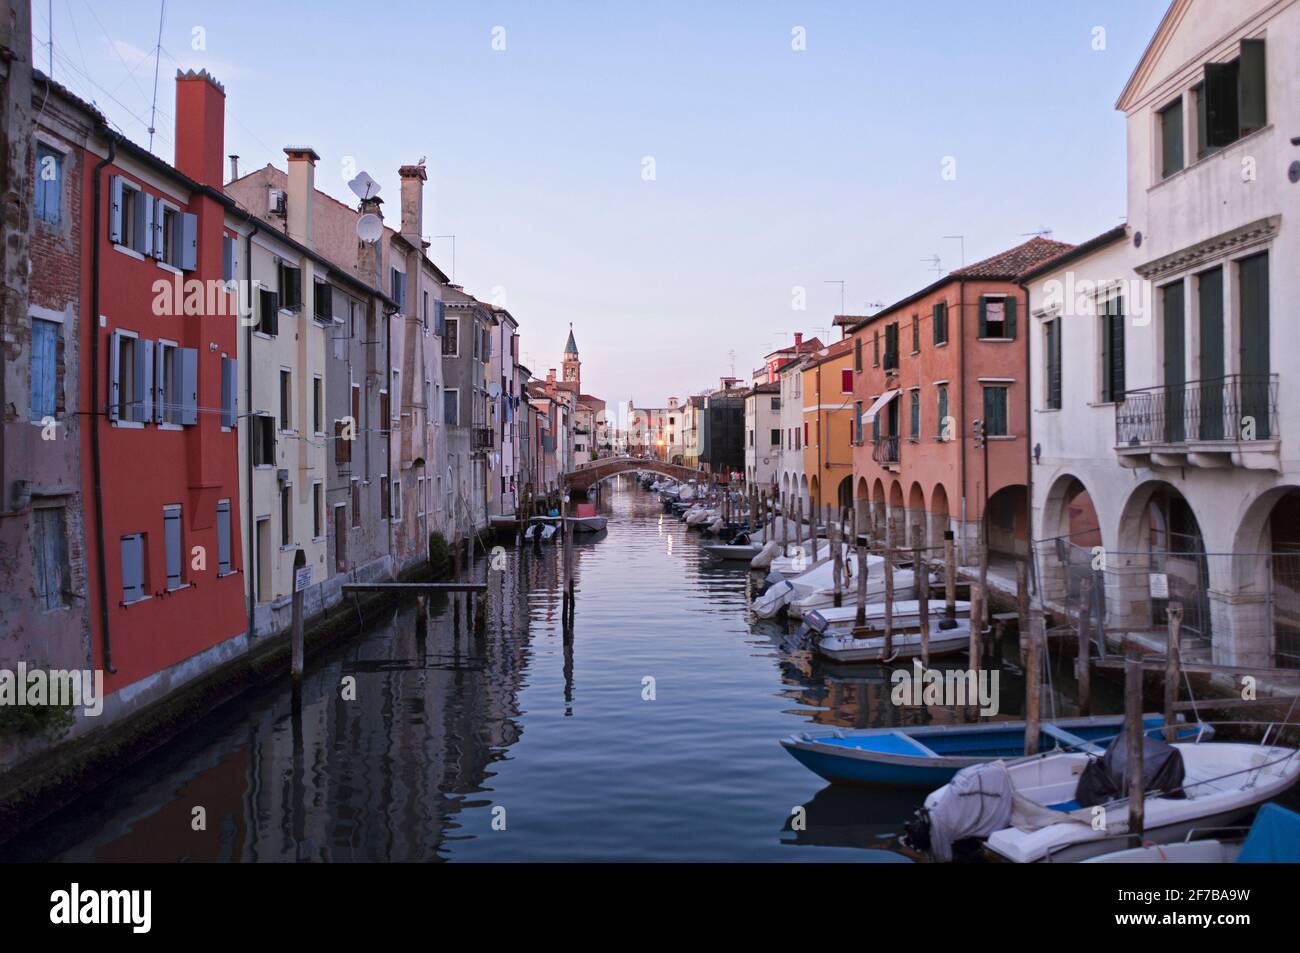 CHIOGGIA, ITALY - SEPTEMBER 15, 2019: The main canal of the city of Chioggia called Little Venice with its boats reflecting the adjacent buildings and Stock Photo